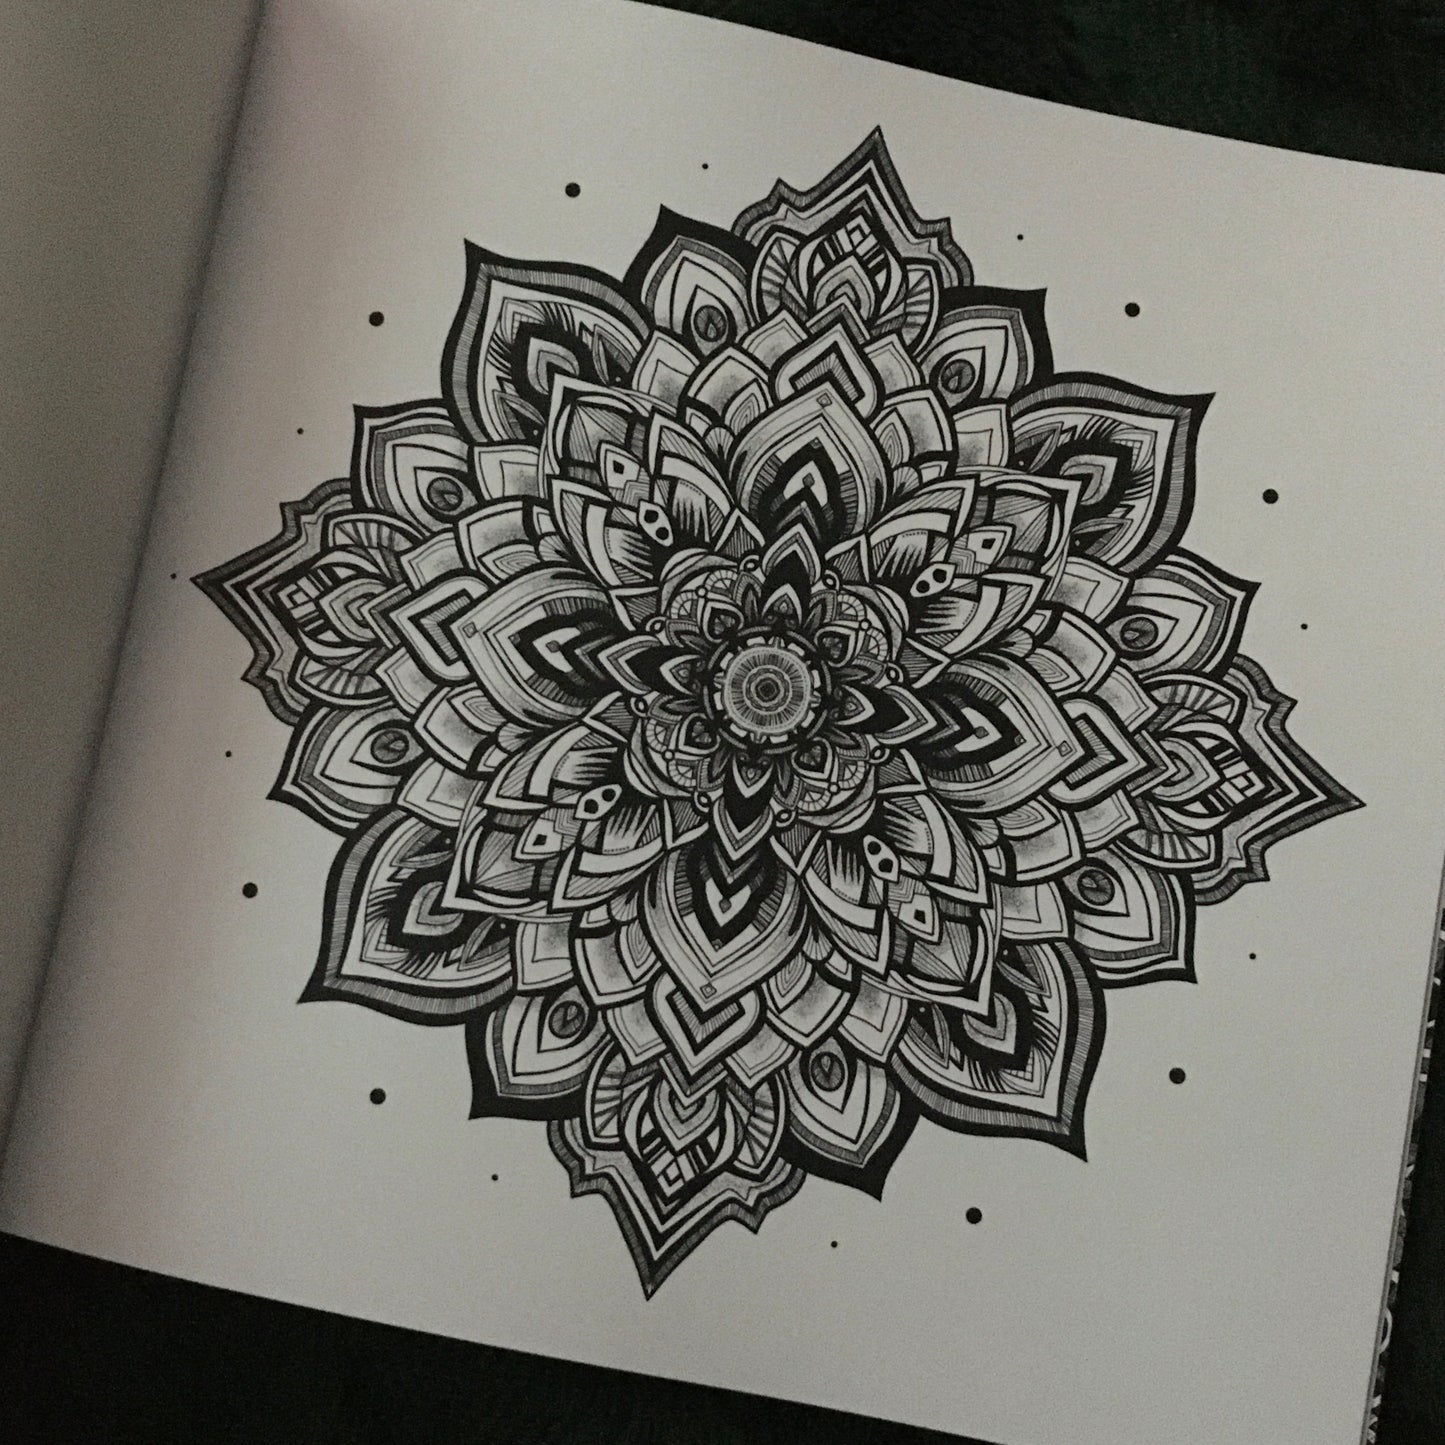 Zentangle Art Therapy - Adult Colouring Book For Mindfulness - Mental Health Matters Managing Anxiety/Depression